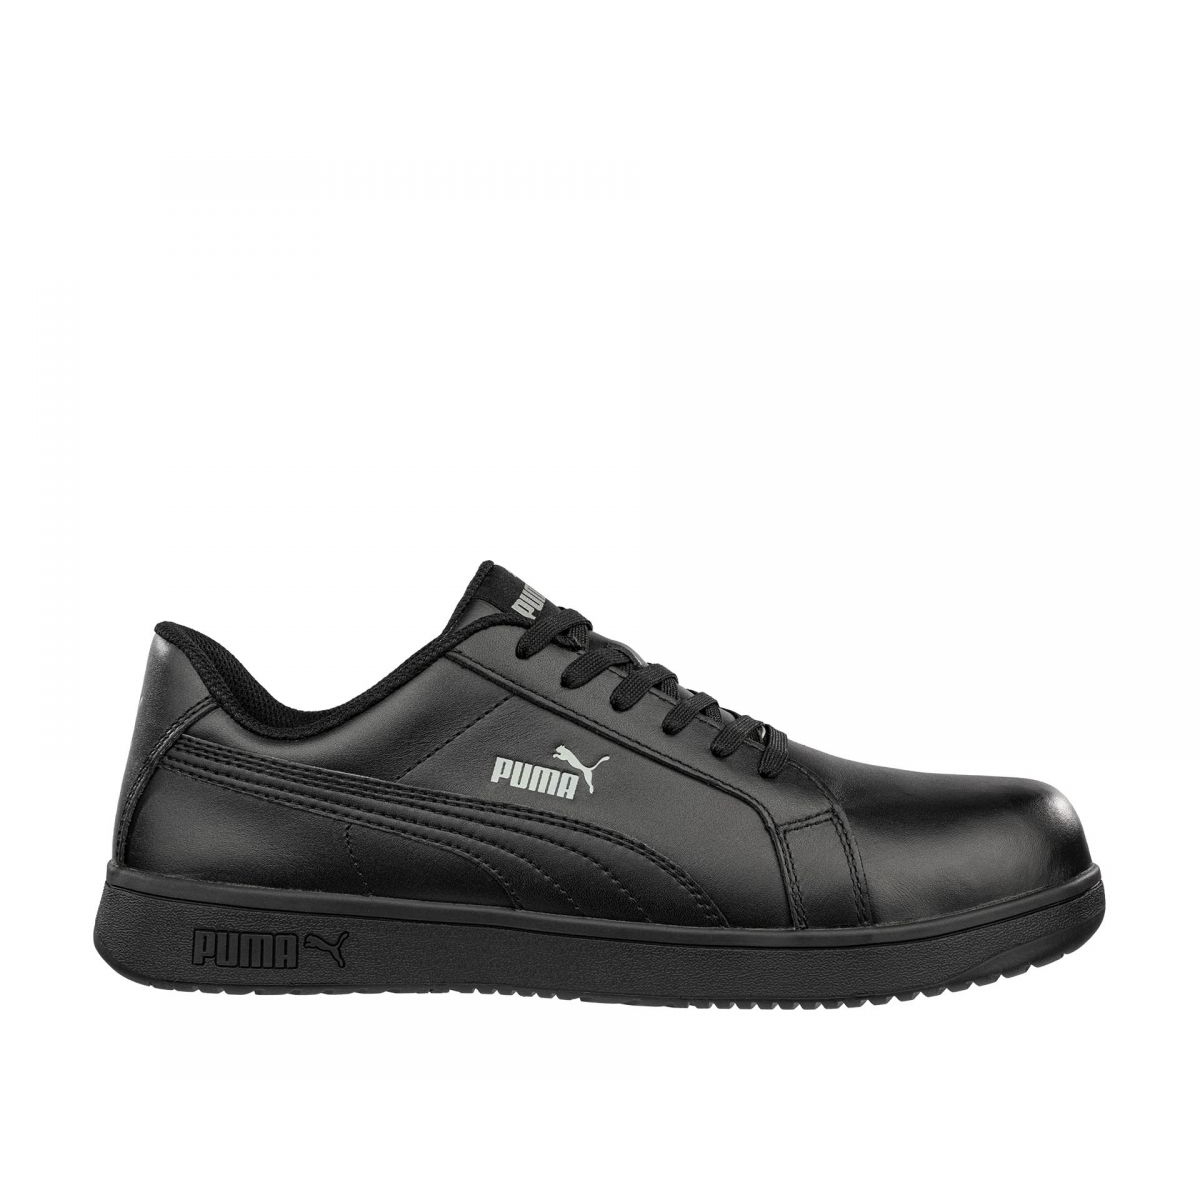 PUMA Safety Women's Iconic Low Composite Toe SD Work Shoes Smooth Black Leather - 640105 BLACK - BLACK, 9